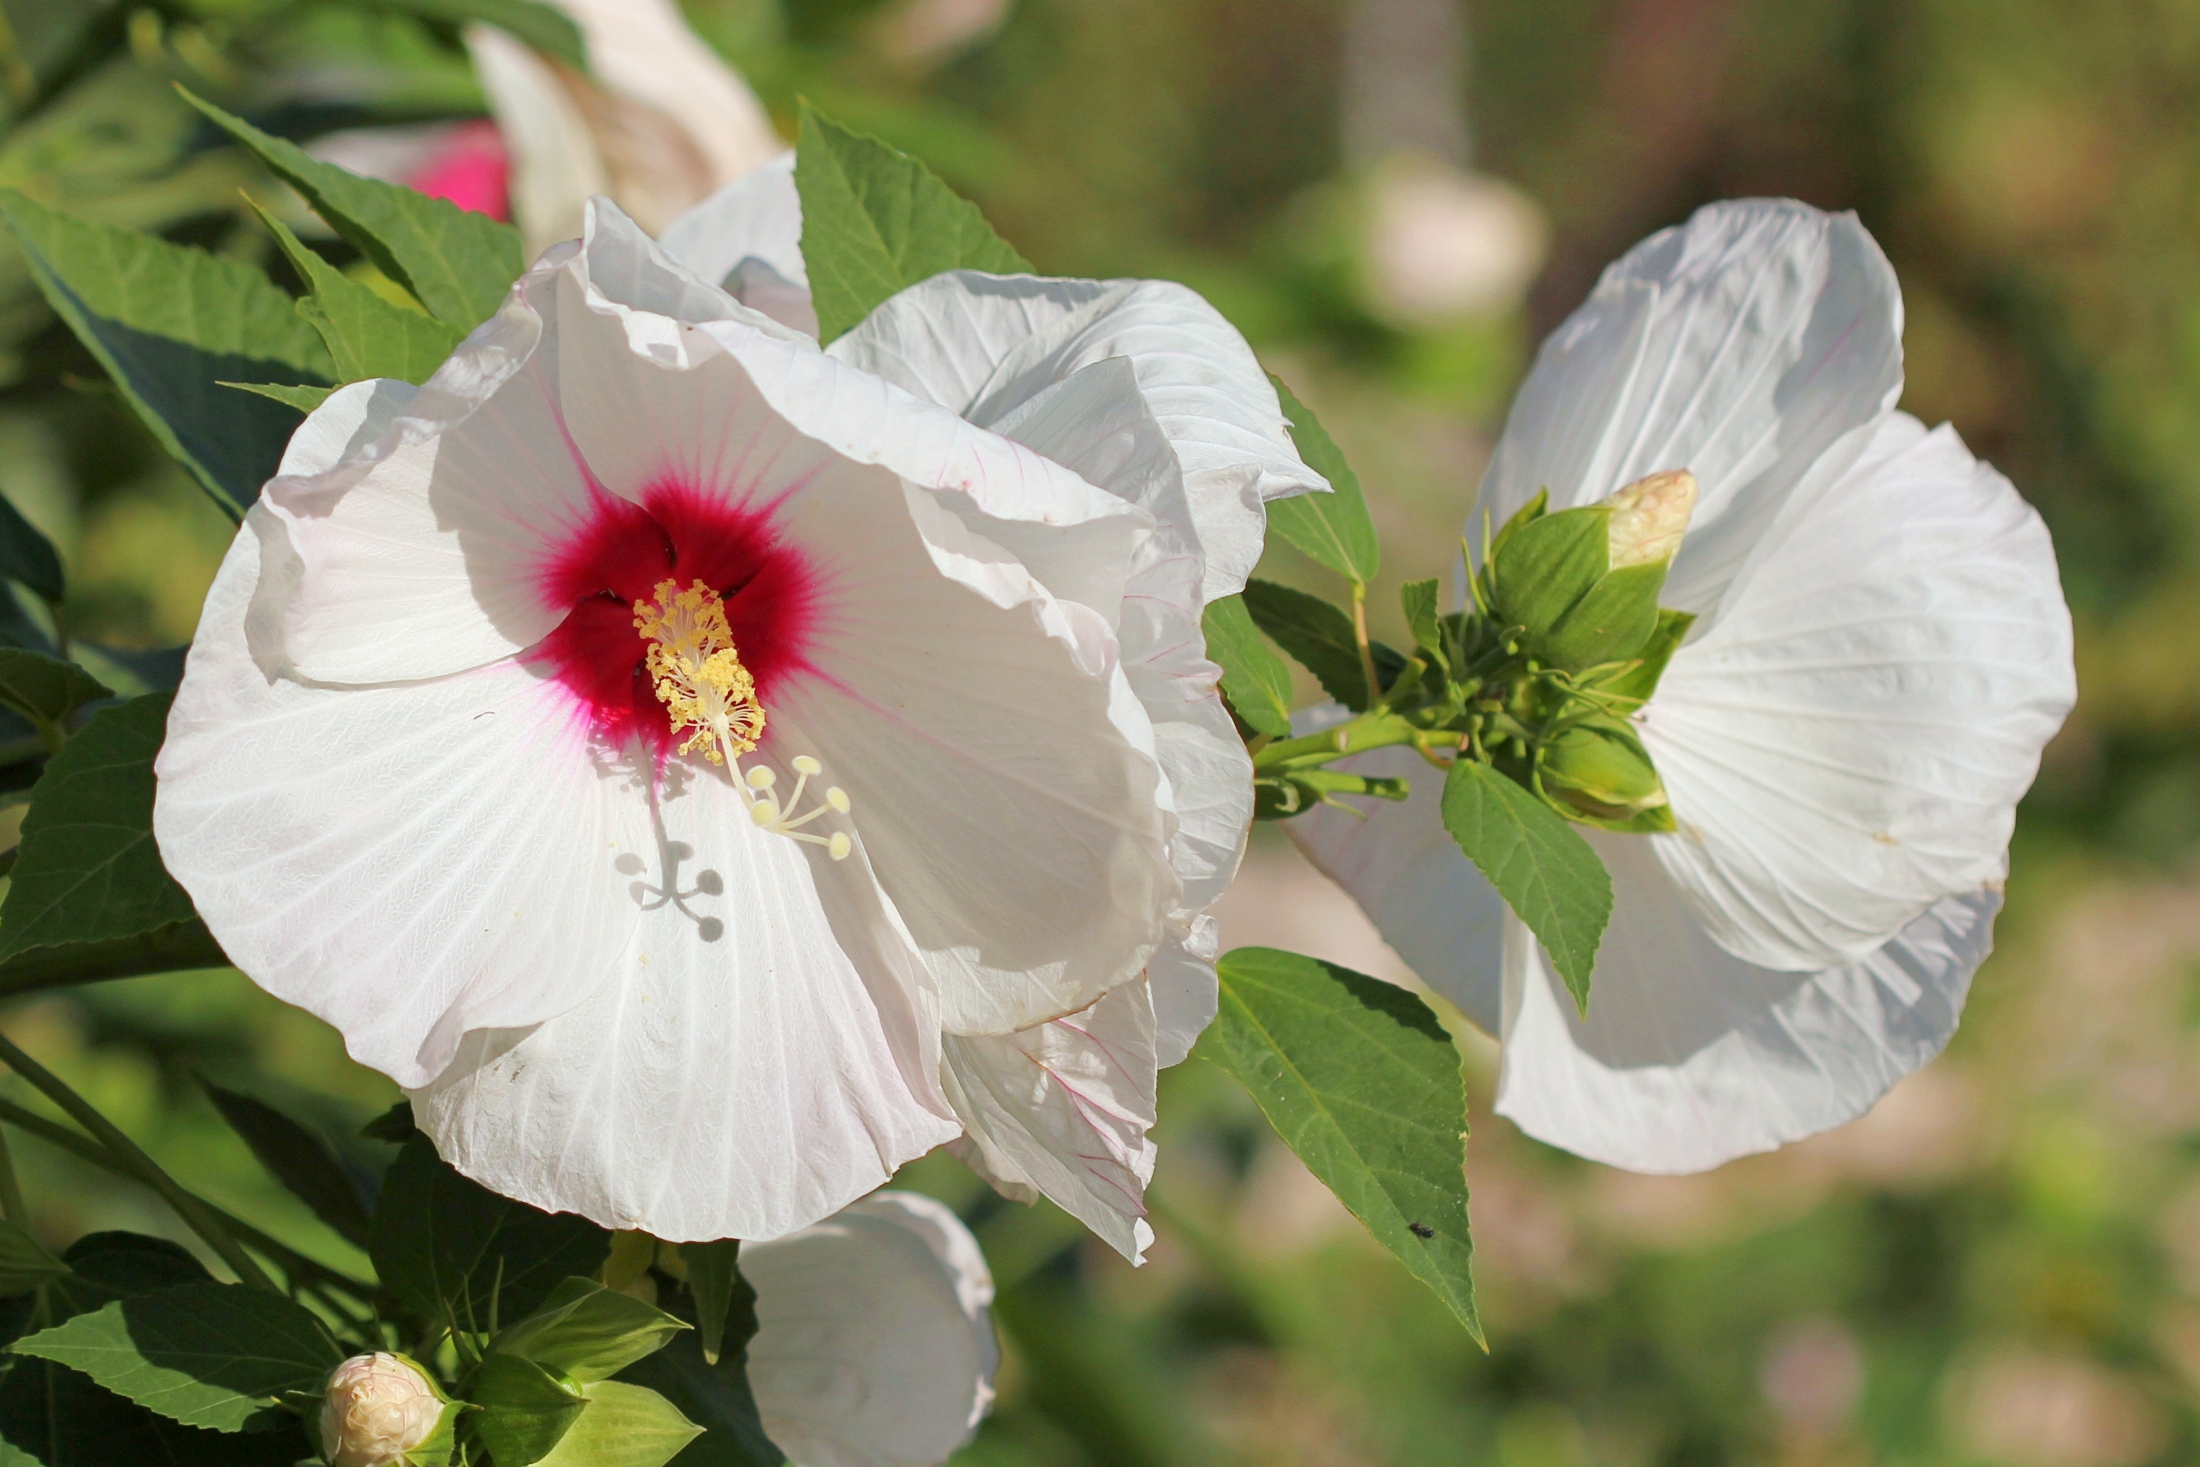 Hibiscus How To Plant Grow And Care For Rose Of Sharon Plants The Old Farmer S Almanac,Baggage Allowance United Airlines